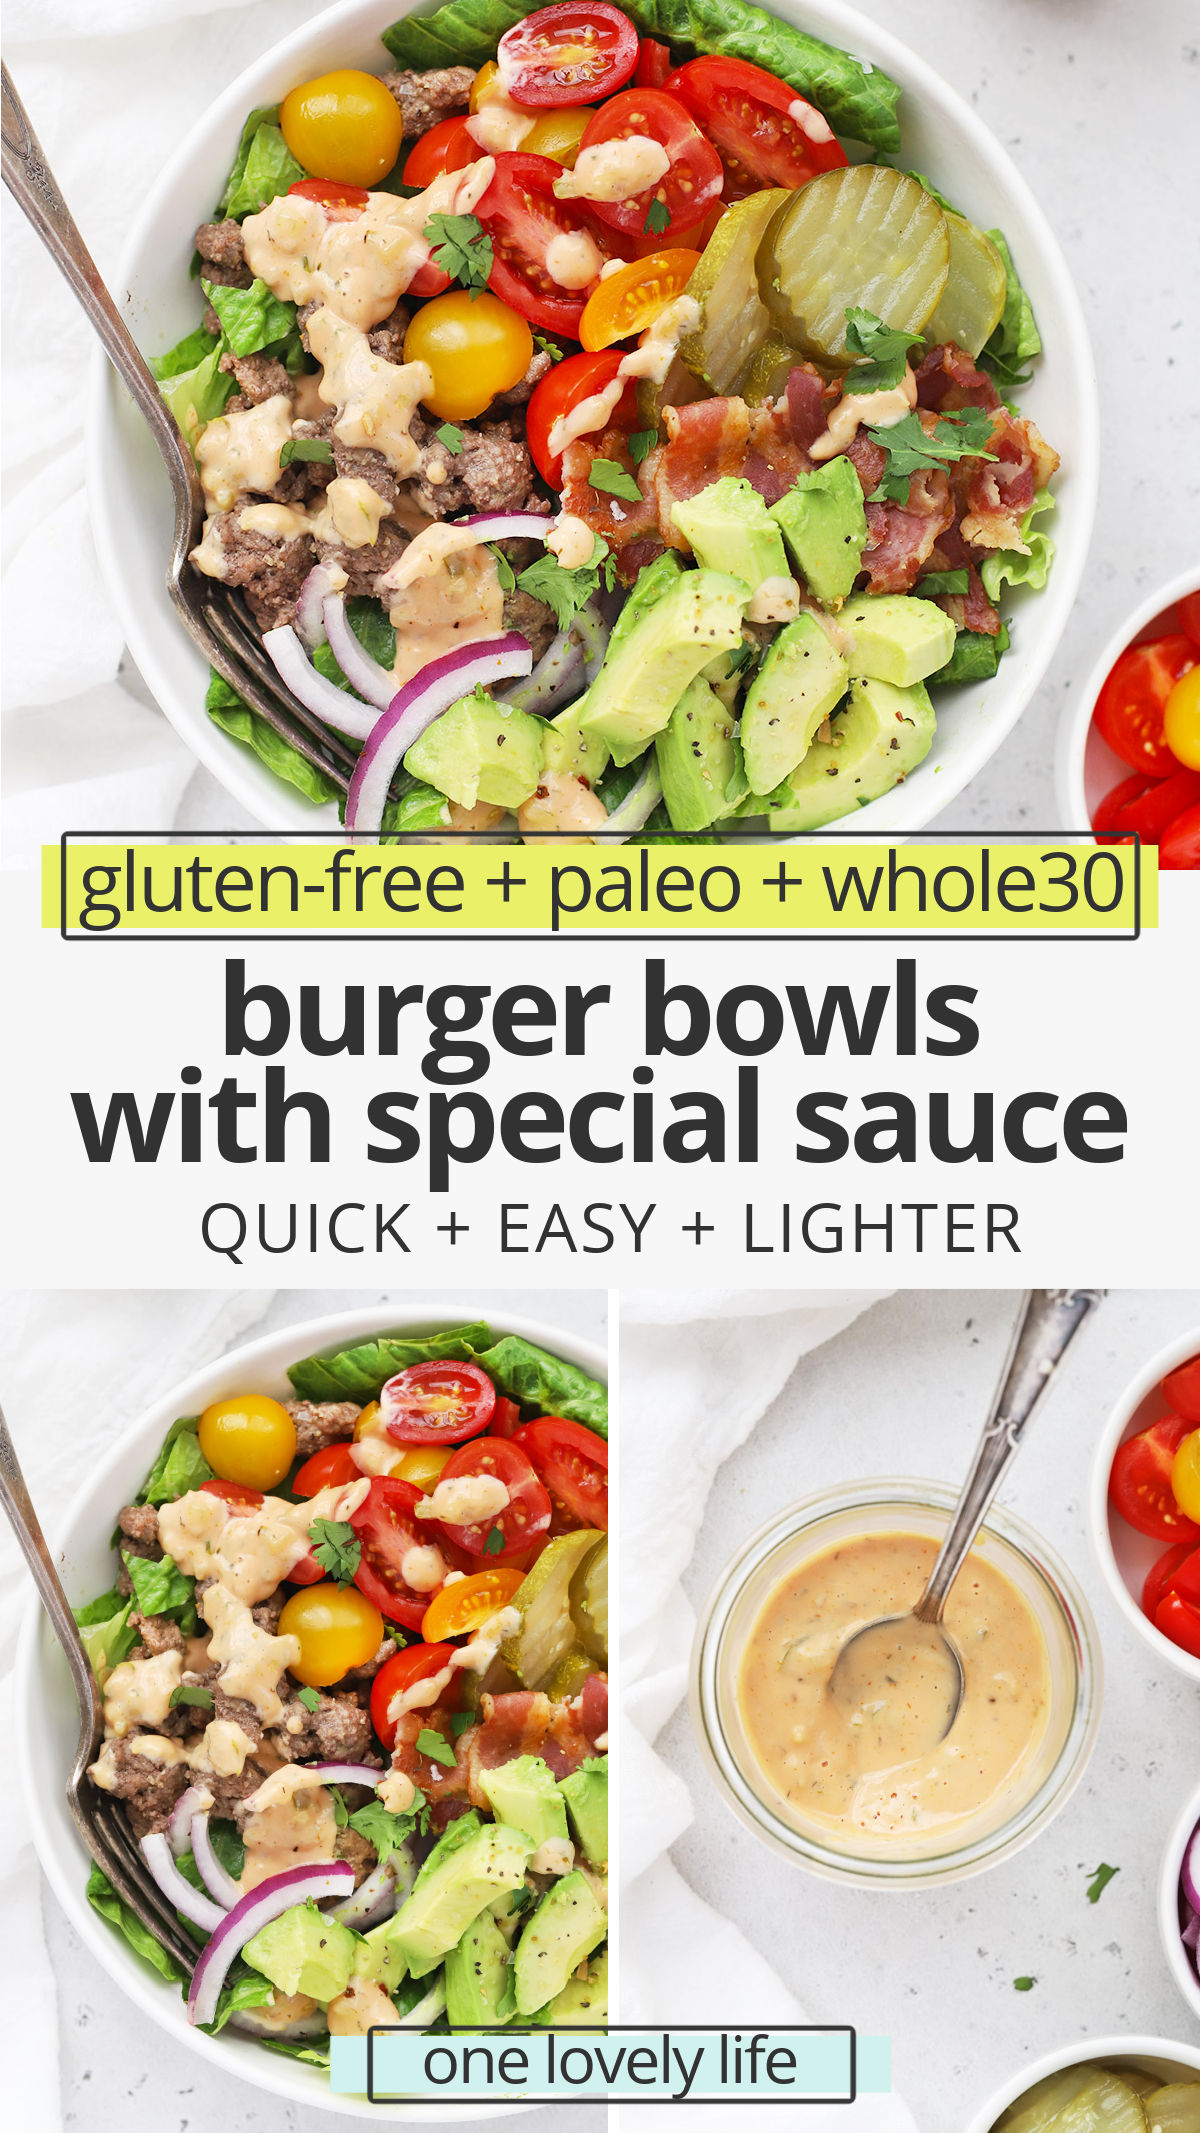 Burger Bowls with Special Sauce - Load all your favorite hamburger toppings onto a bed of greens and drizzle with our favorite special sauce to build an amazing burger salad. (Gluten-Free, Paleo & Whole30-Friendly) // Whole30 Burger Bowls // Special Sauce for Burgers // Paleo Burger Bowl // Burger Salad